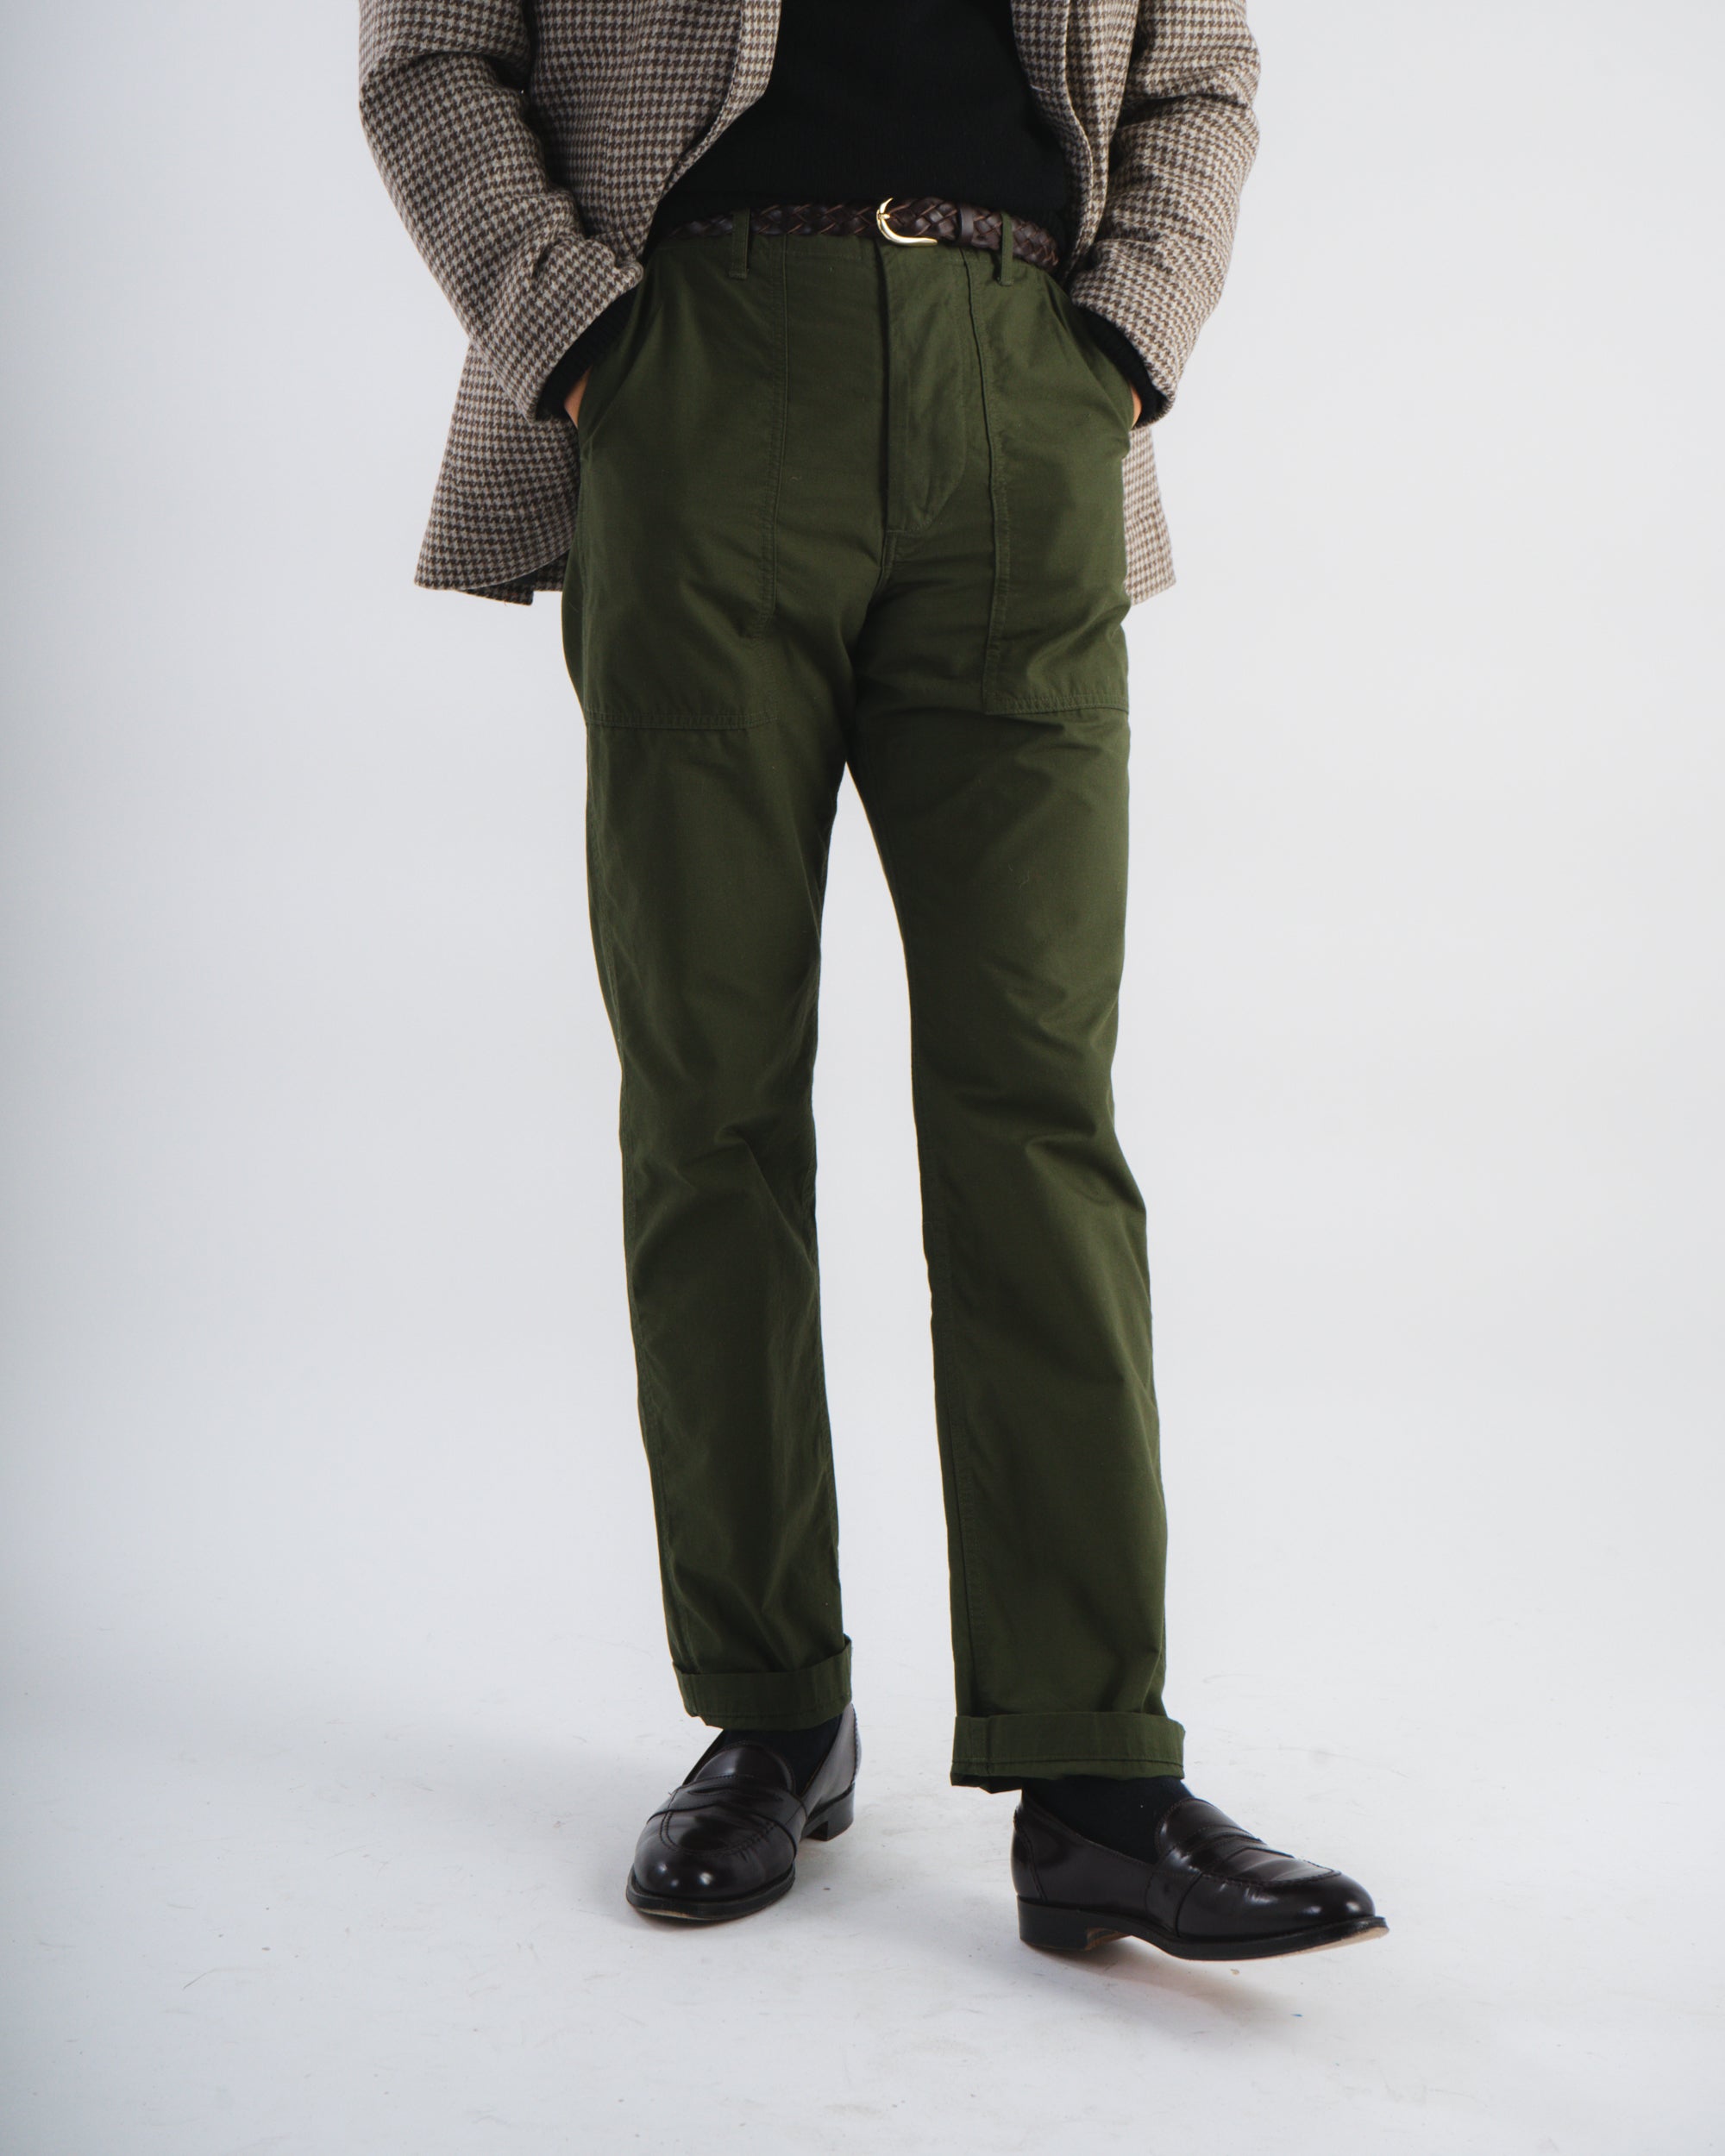 High Rise Japanese Ripstop Fatigue Pant - Army Green